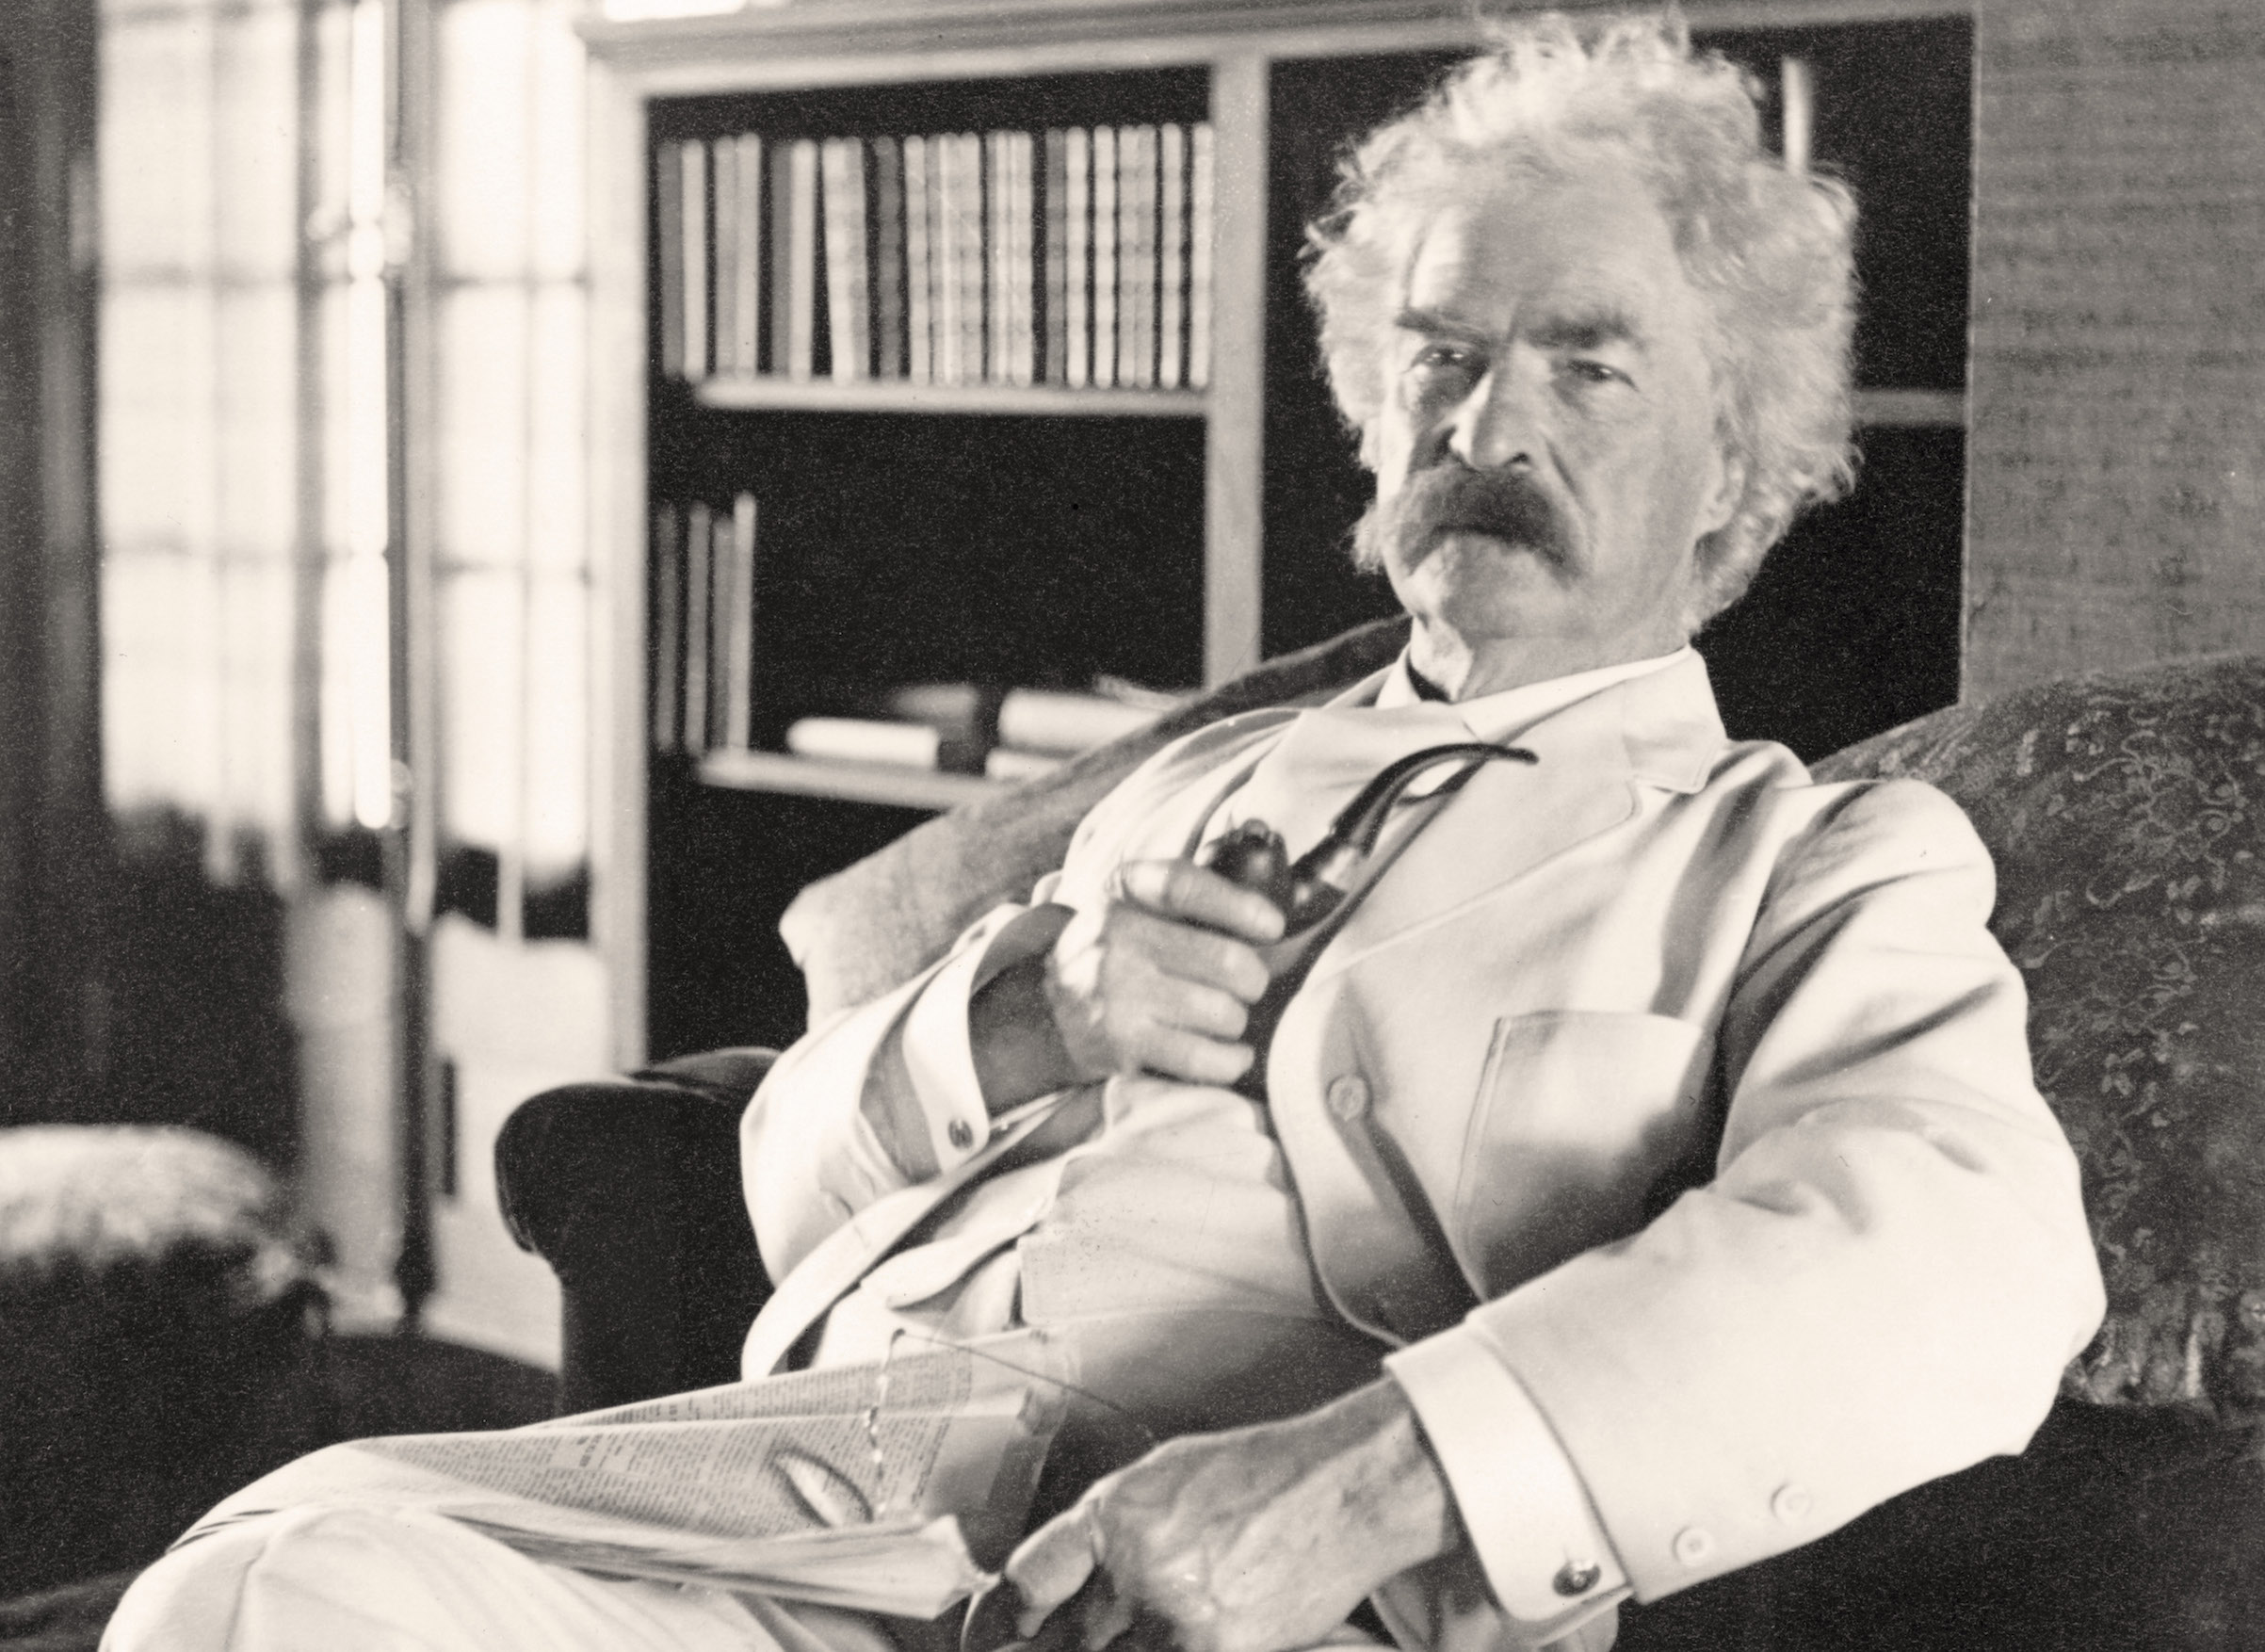 Samuel Langhorne Clemens (1835 to 1910), known by pen name Mark Twain. Photograph taken in his old age. (Universal Images Group/Getty Images)